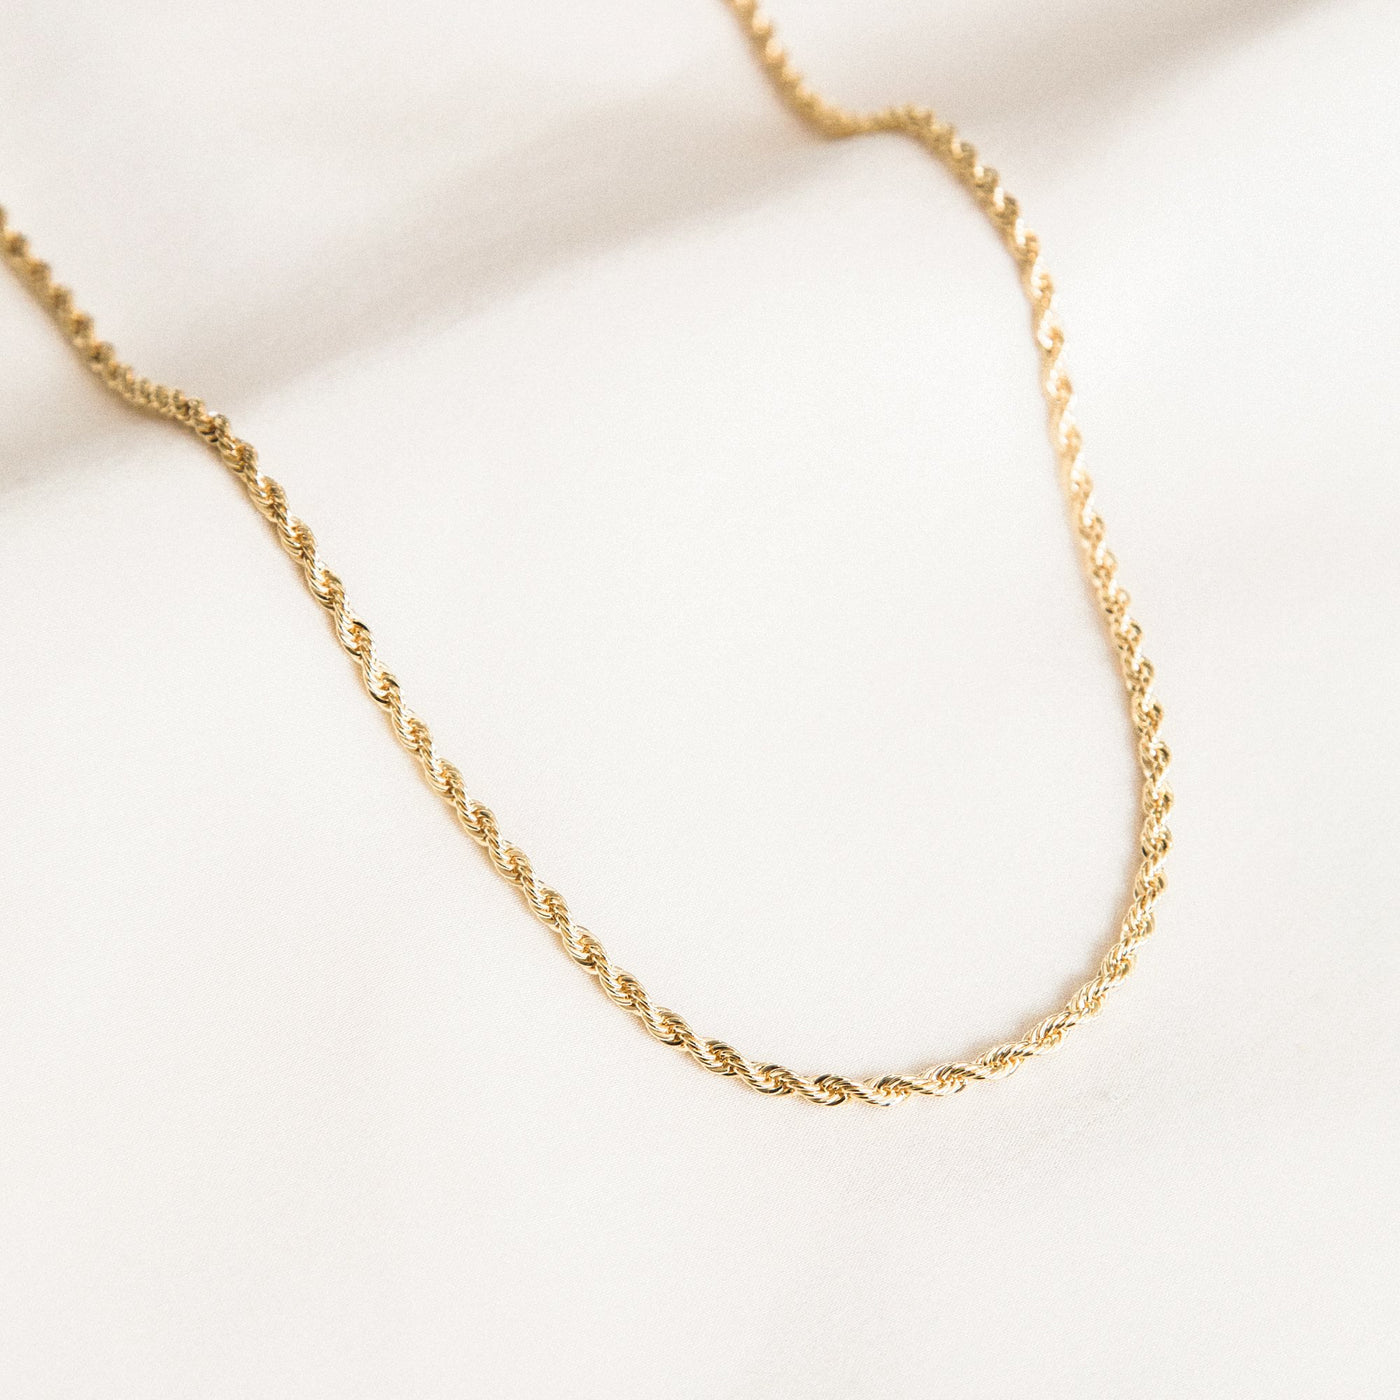 Chunky Rope Chain Necklace | Simple & Dainty Jewelry